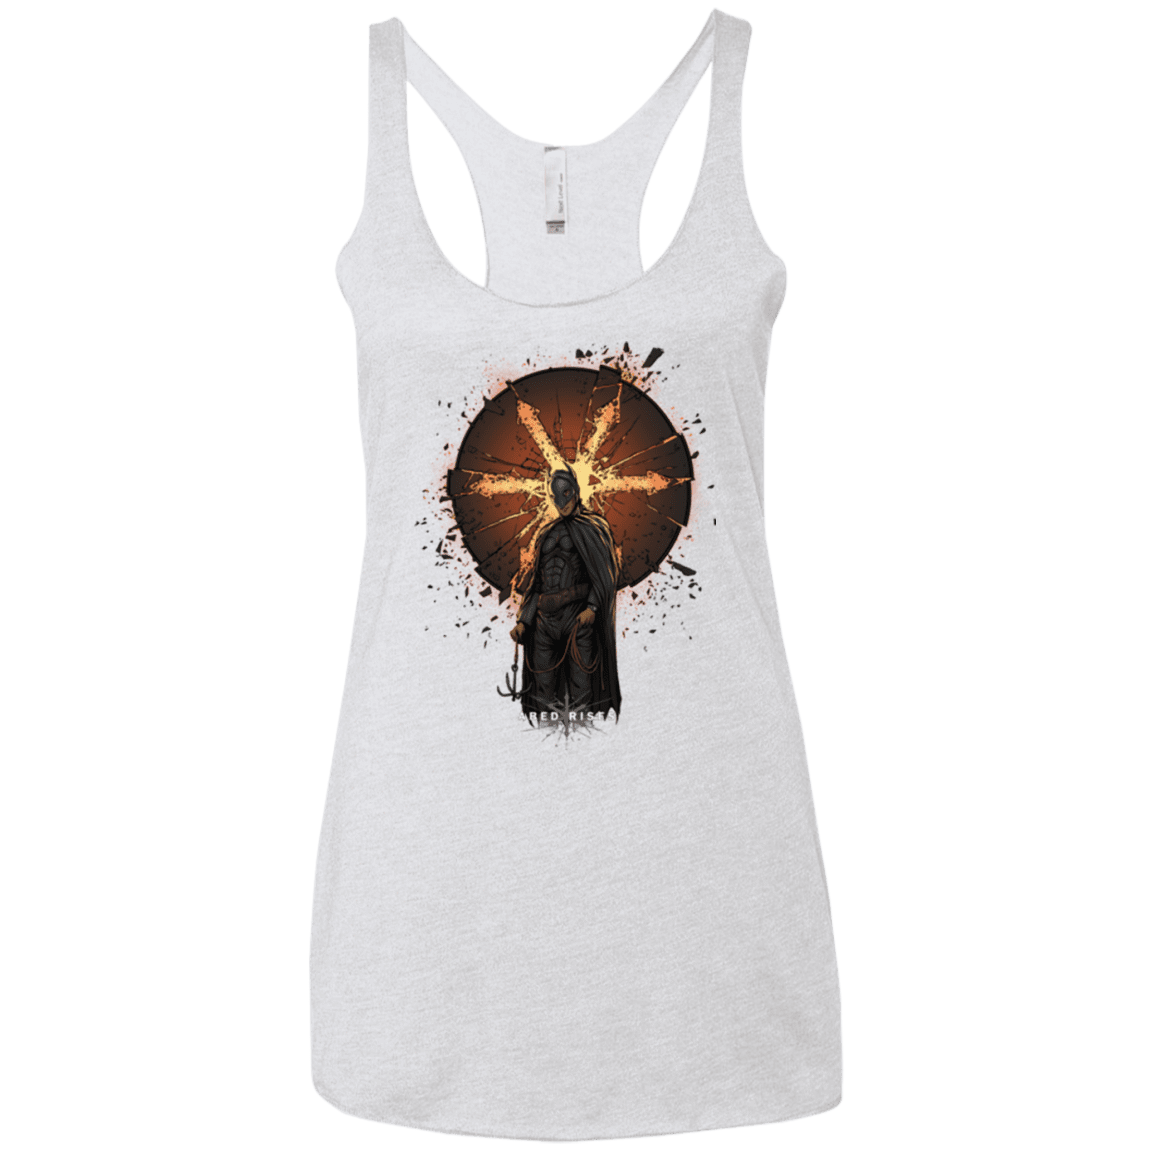 T-Shirts Heather White / X-Small Abed Rises Women's Triblend Racerback Tank